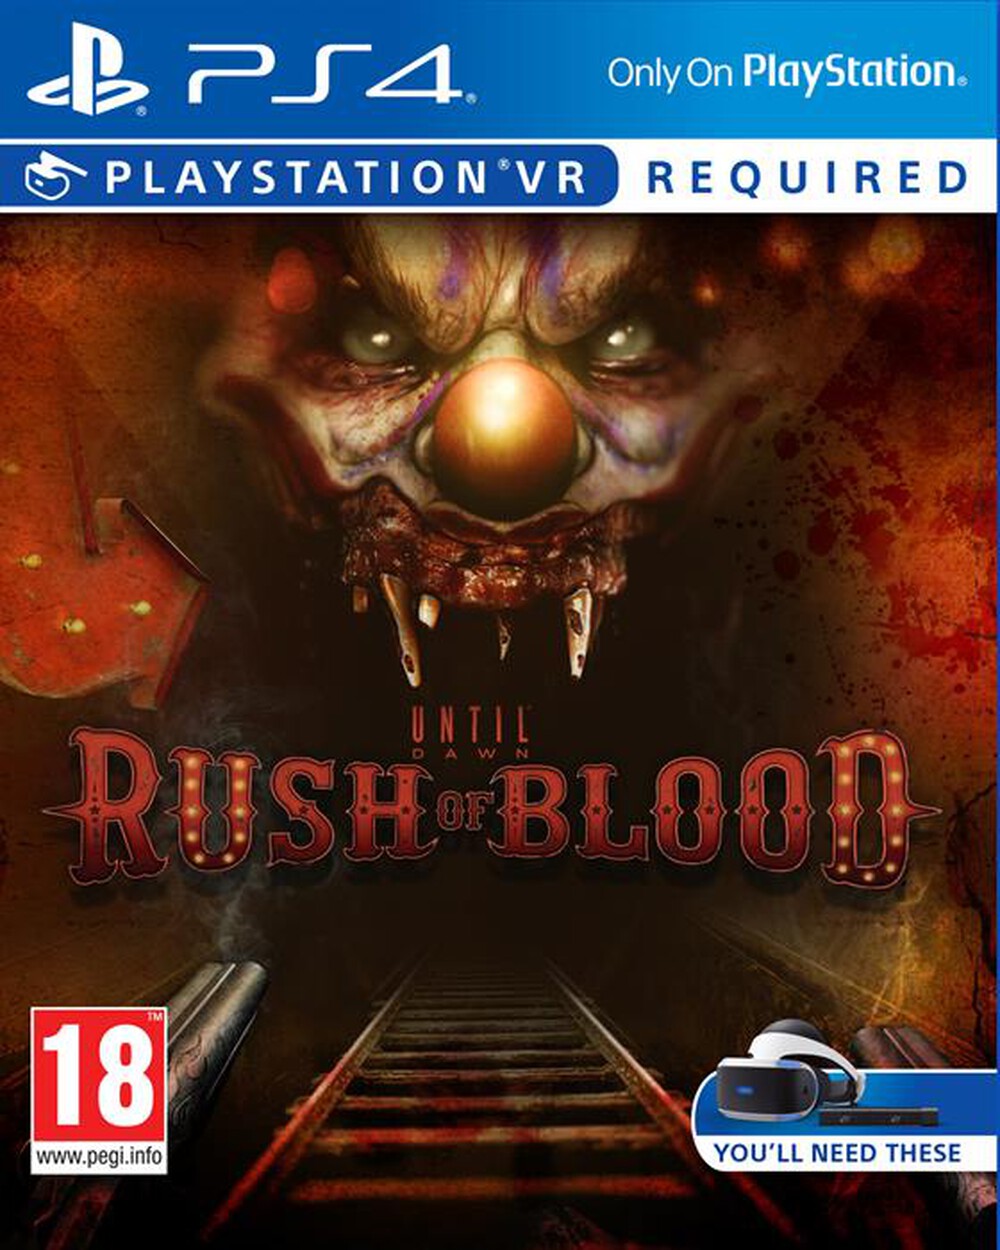 "SONY COMPUTER - Until Dawn Rush of Blood - Playstation VR"